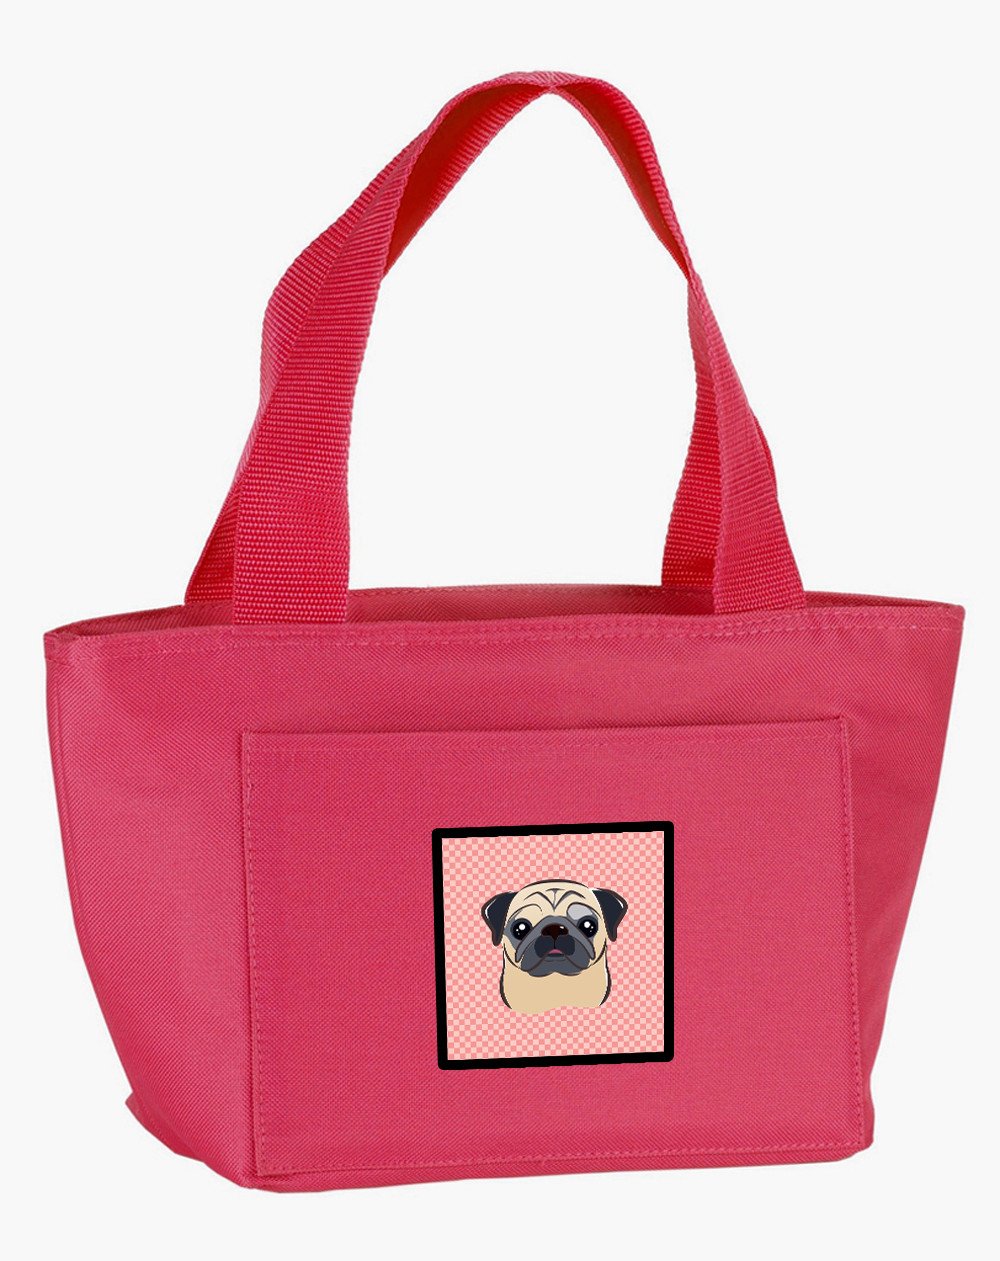 Checkerboard Pink Fawn Pug Lunch Bag BB1262PK-8808 by Caroline's Treasures